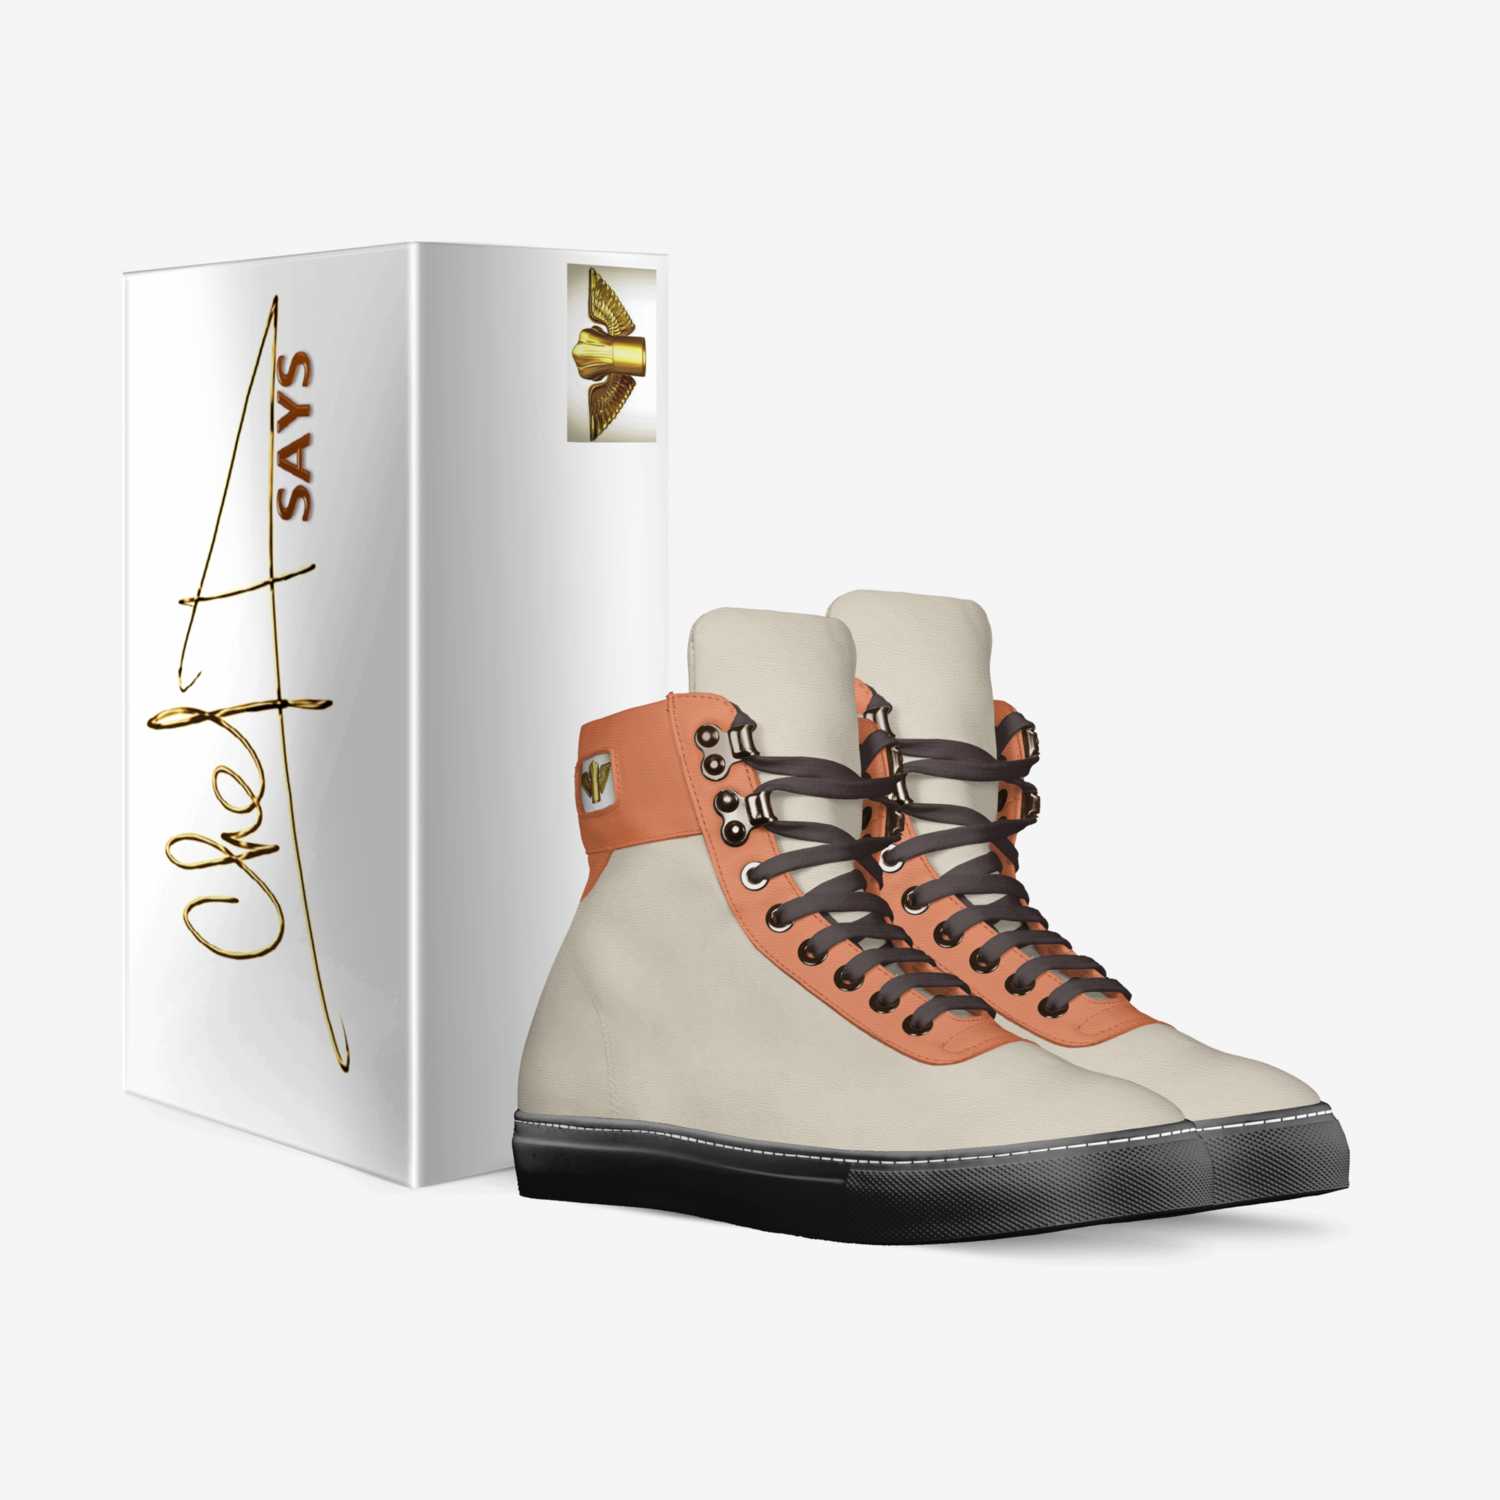 CD Challenger custom made in Italy shoes by Chef Daniel Young | Box view